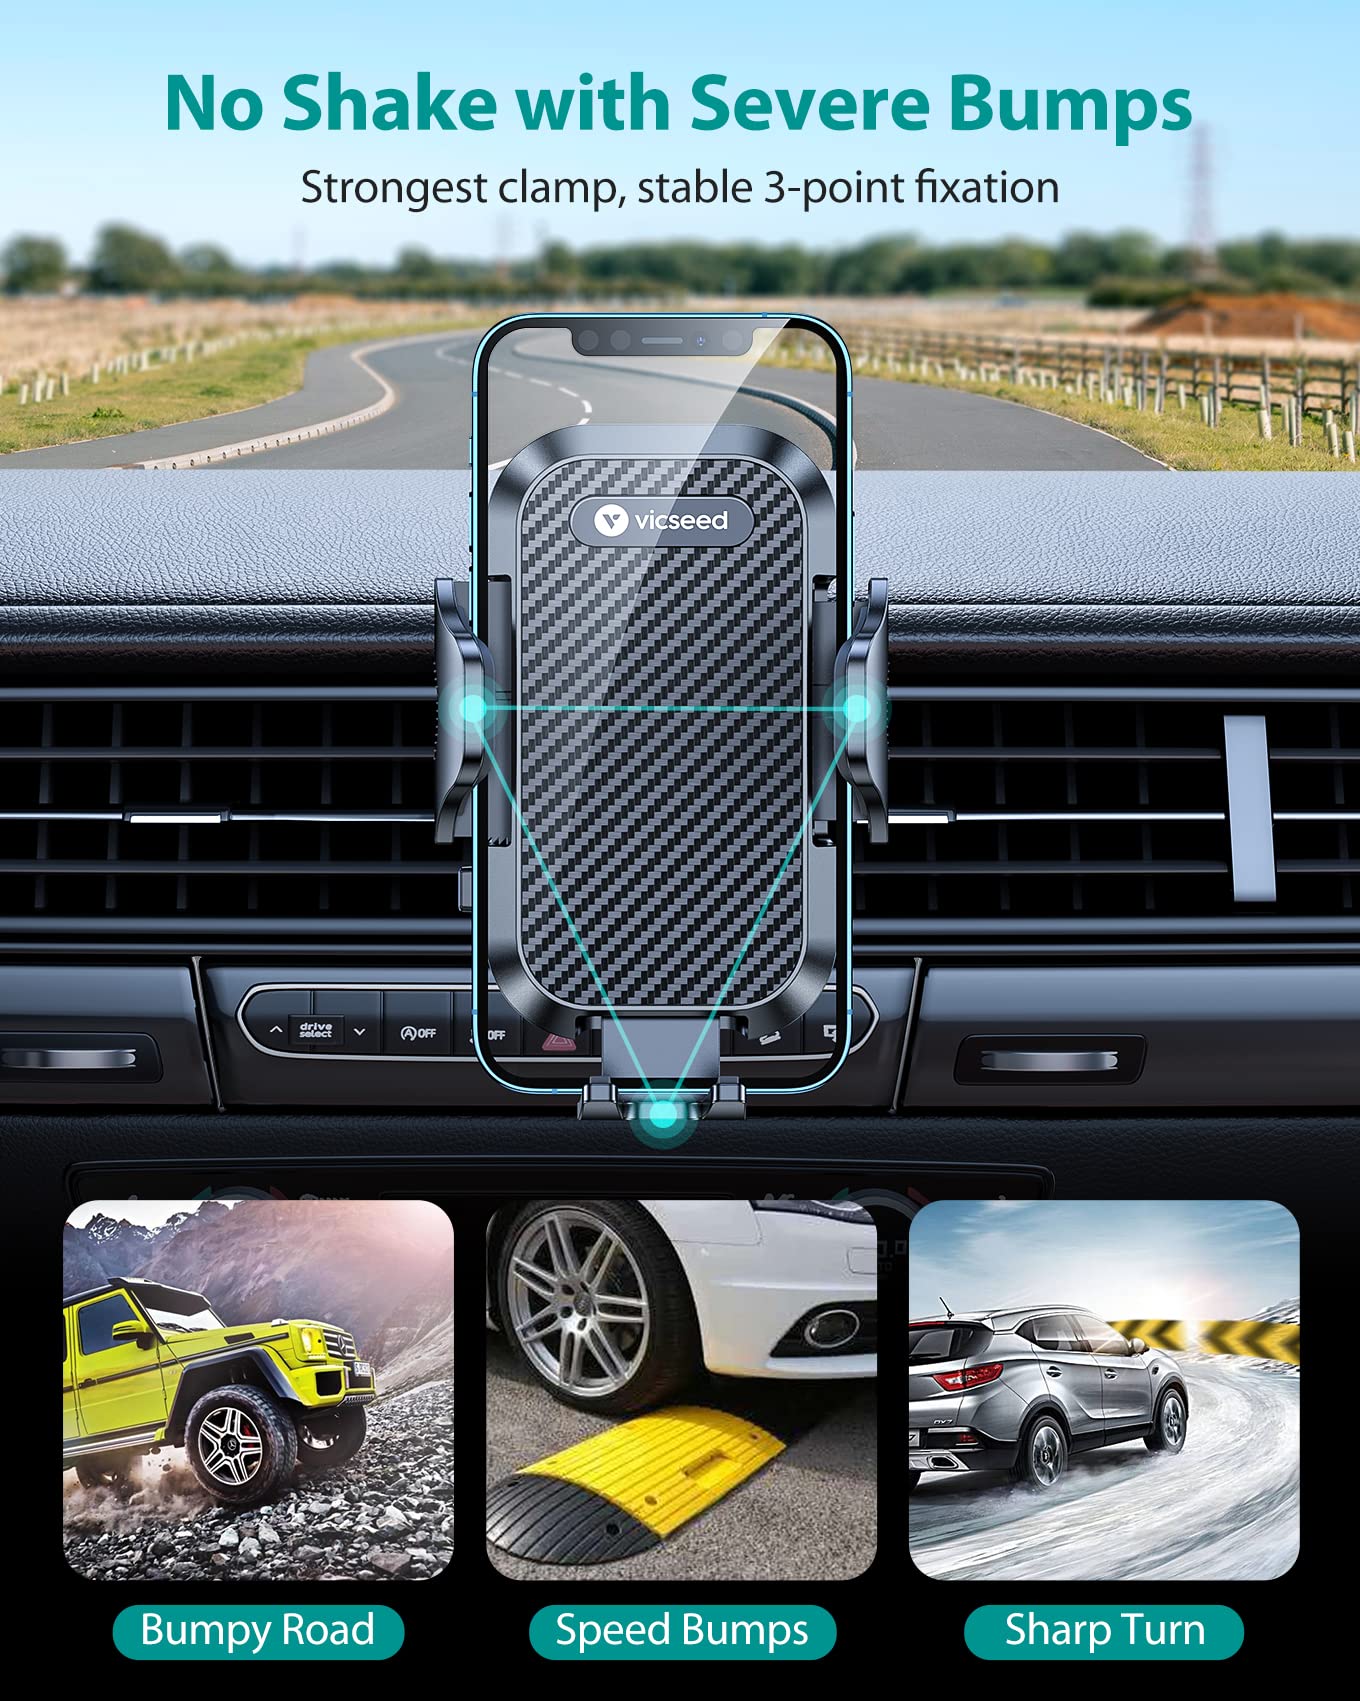 VICSEED Ultra Stable Car Phone Holder Mount Vent, [Upgrade 100% Won't Fall & Break] 2 in 1 Air Vent Phone Mount for Car Easy Clamp Cell Phone Holder Car for iPhone 14 13 12 Pro Max Mini All Phones